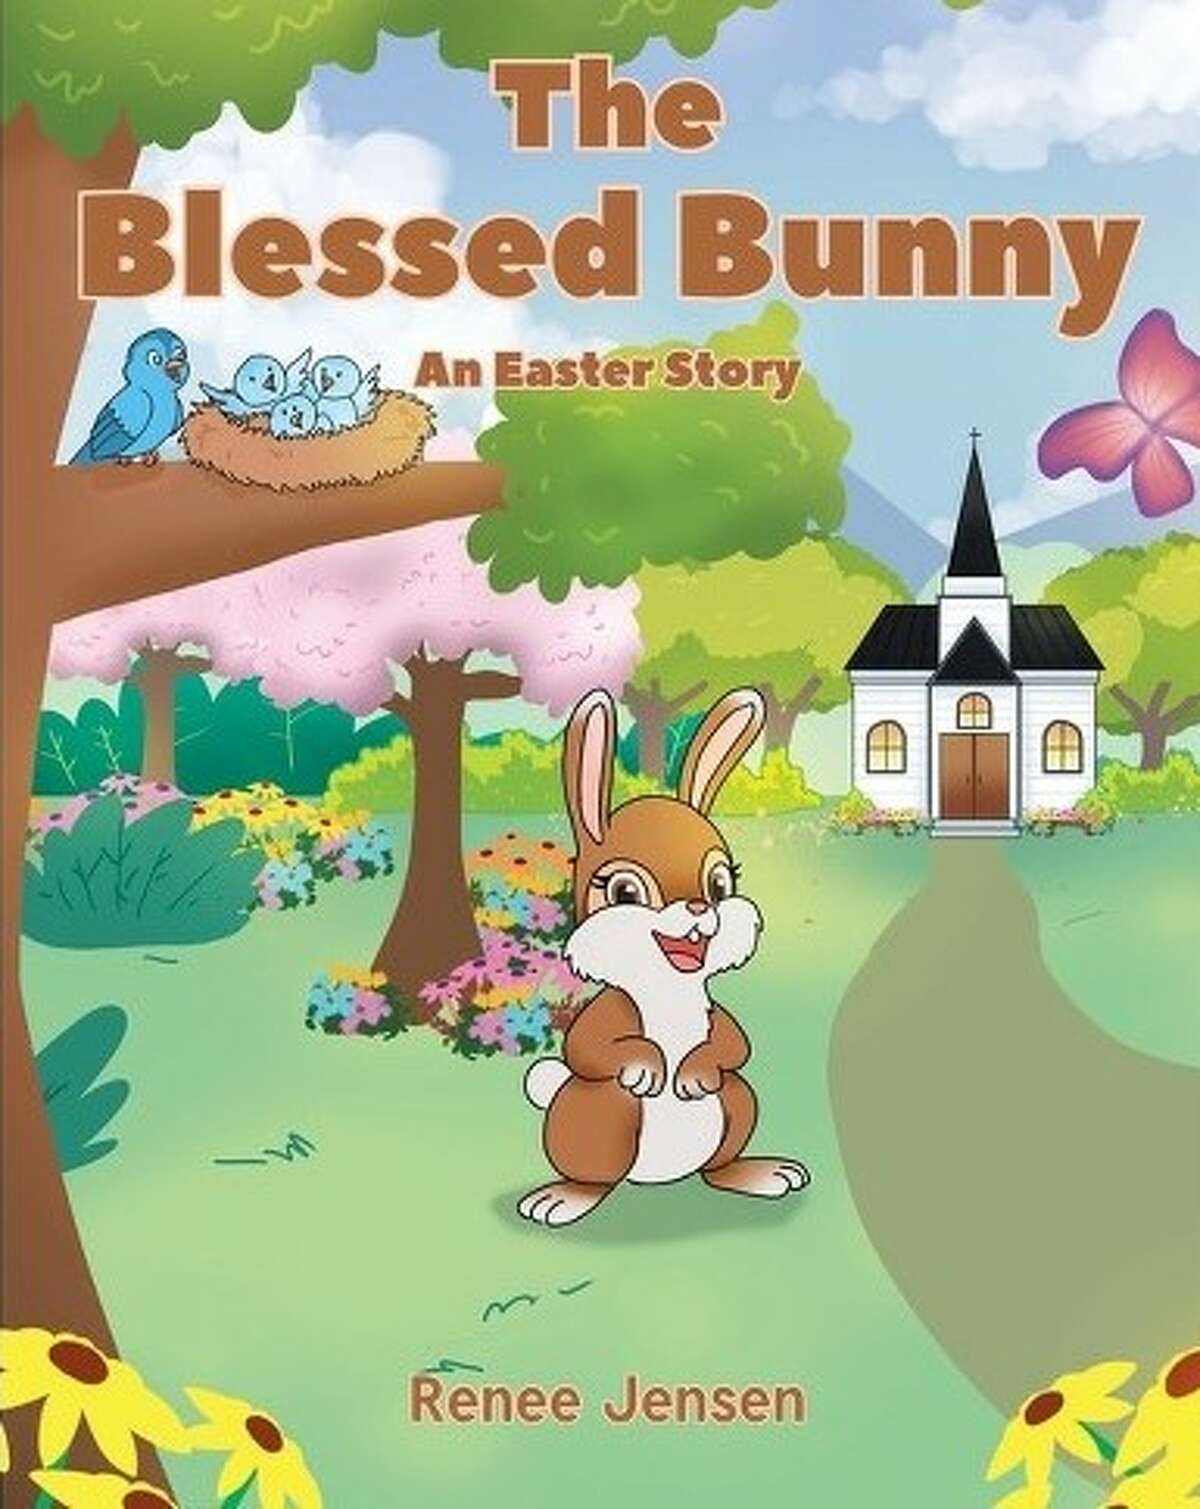 Renee Jensen published The Blessed Bunny in March of 2021. 